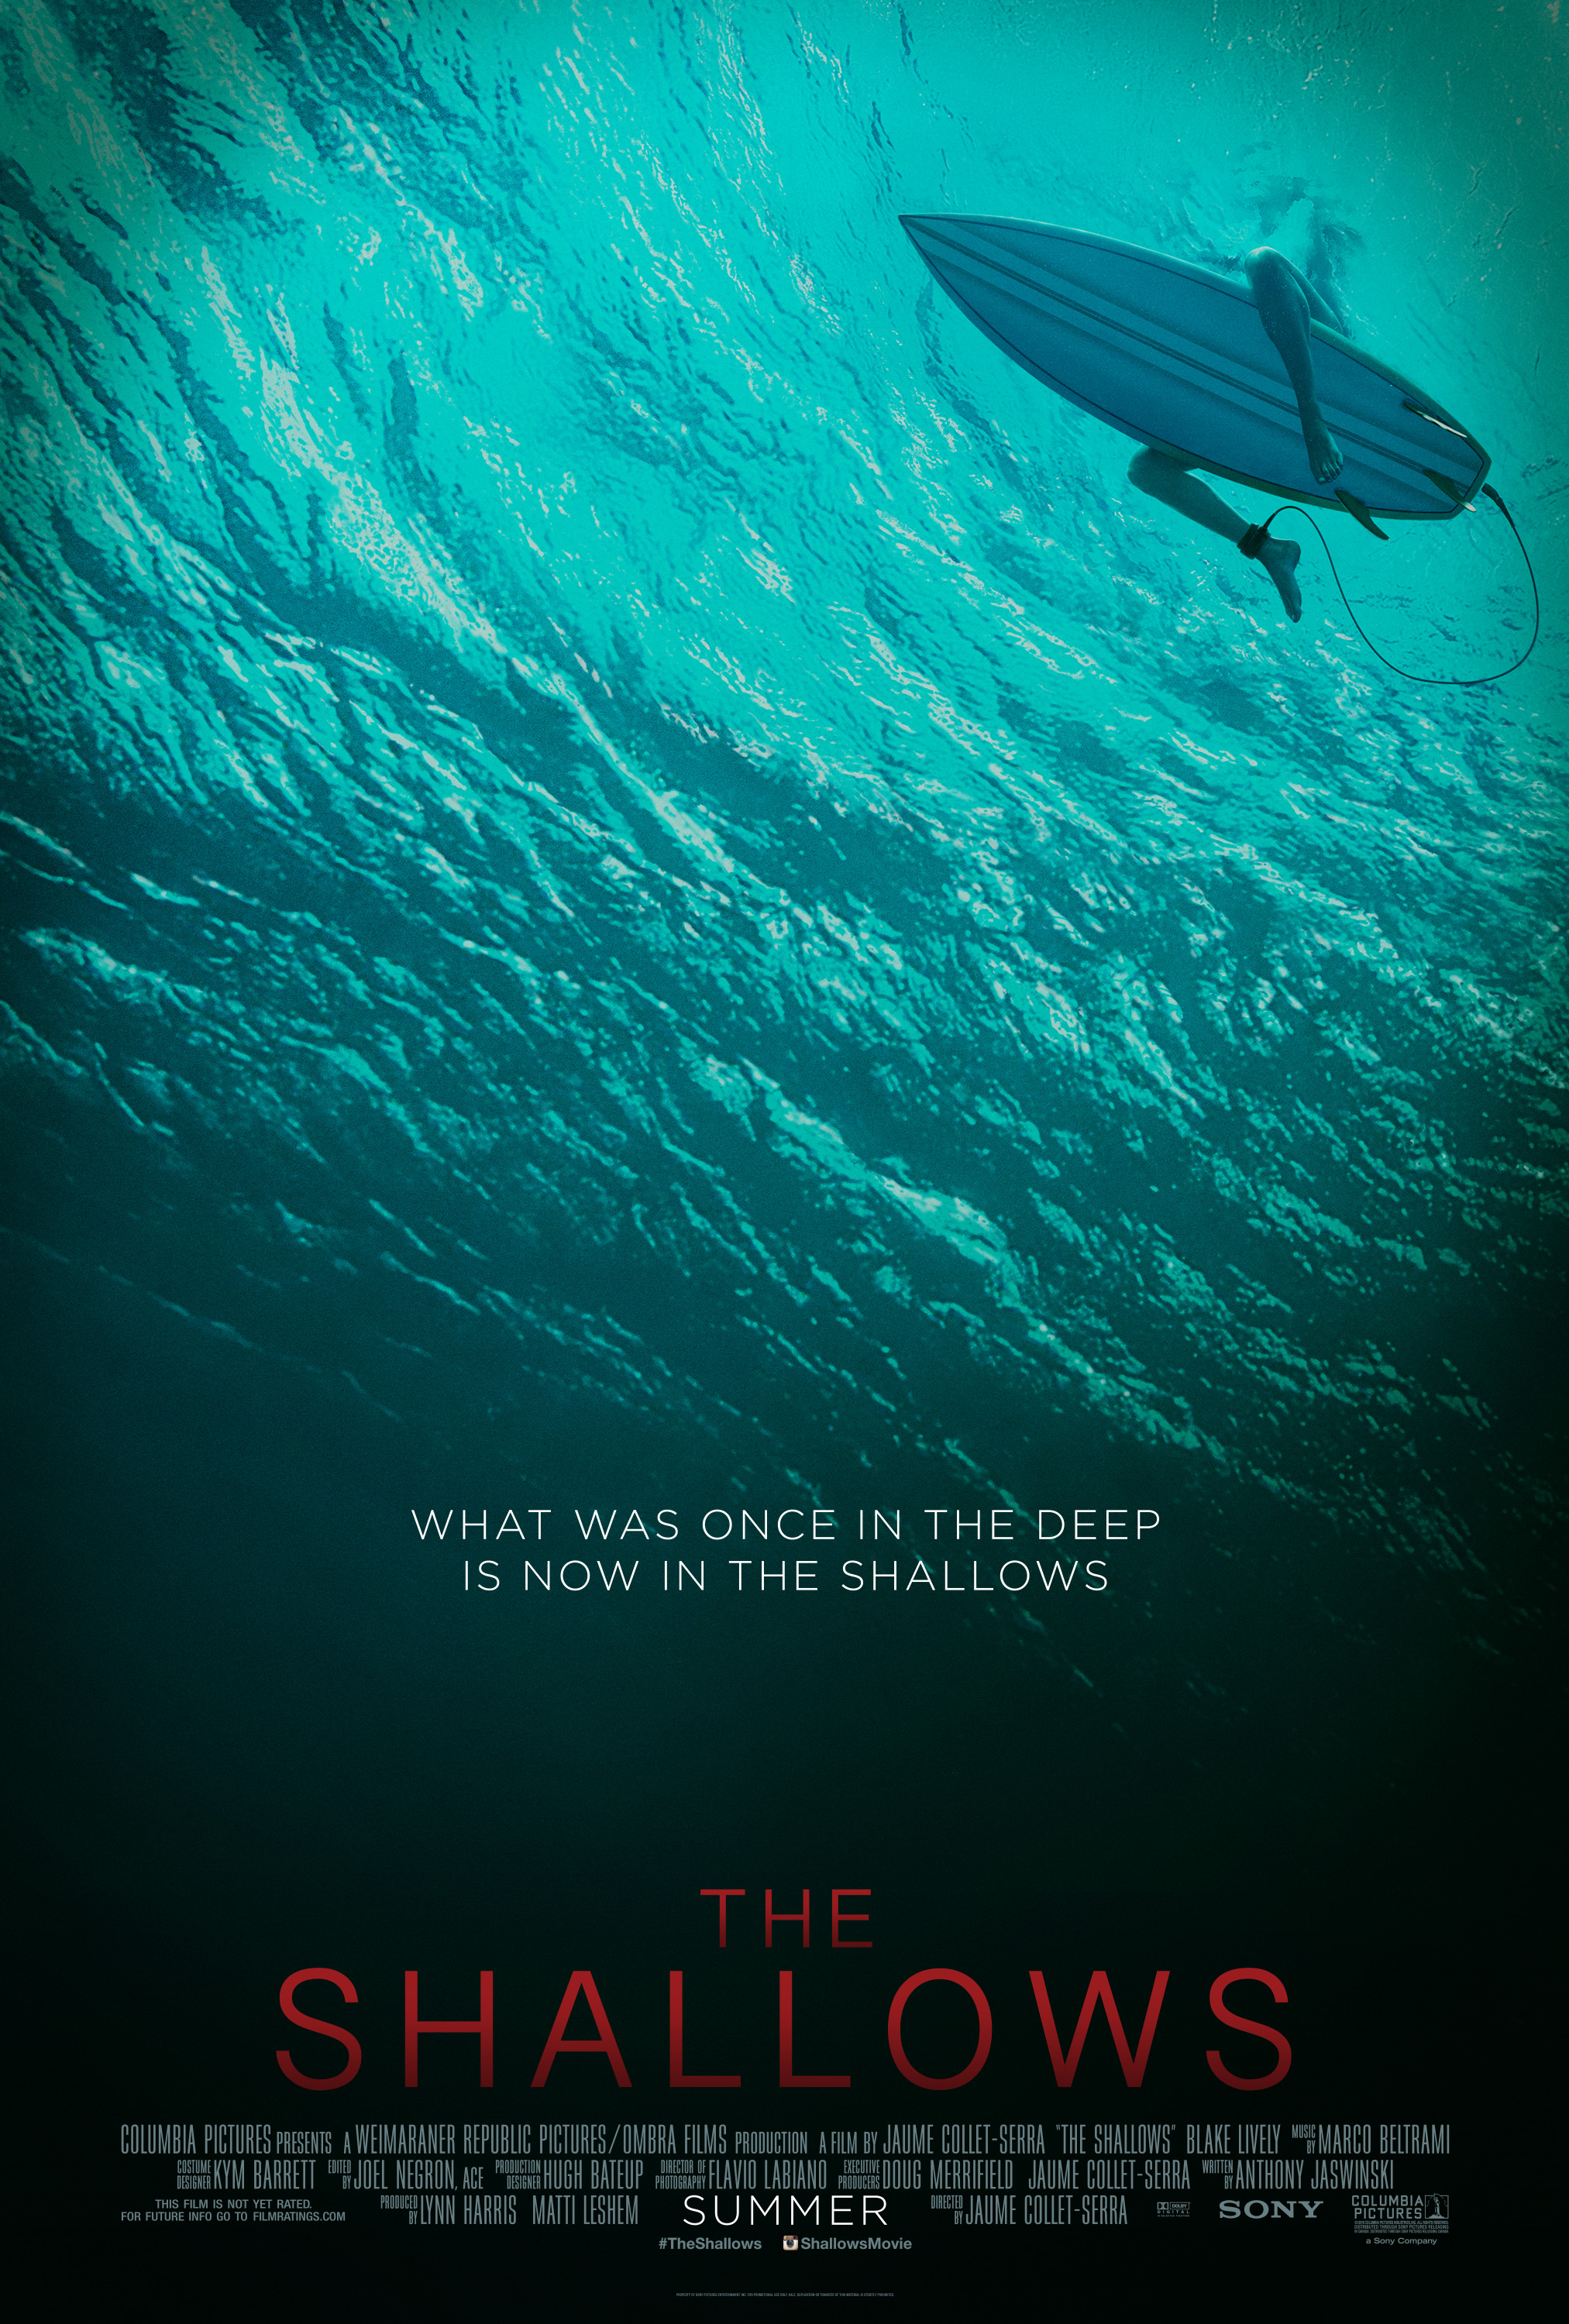 Nancy travels to a secluded beach following the death of her mother. While surfing, she gets attacked by a great white shark, which leaves her stranded on a rock 200 yards from the shore.